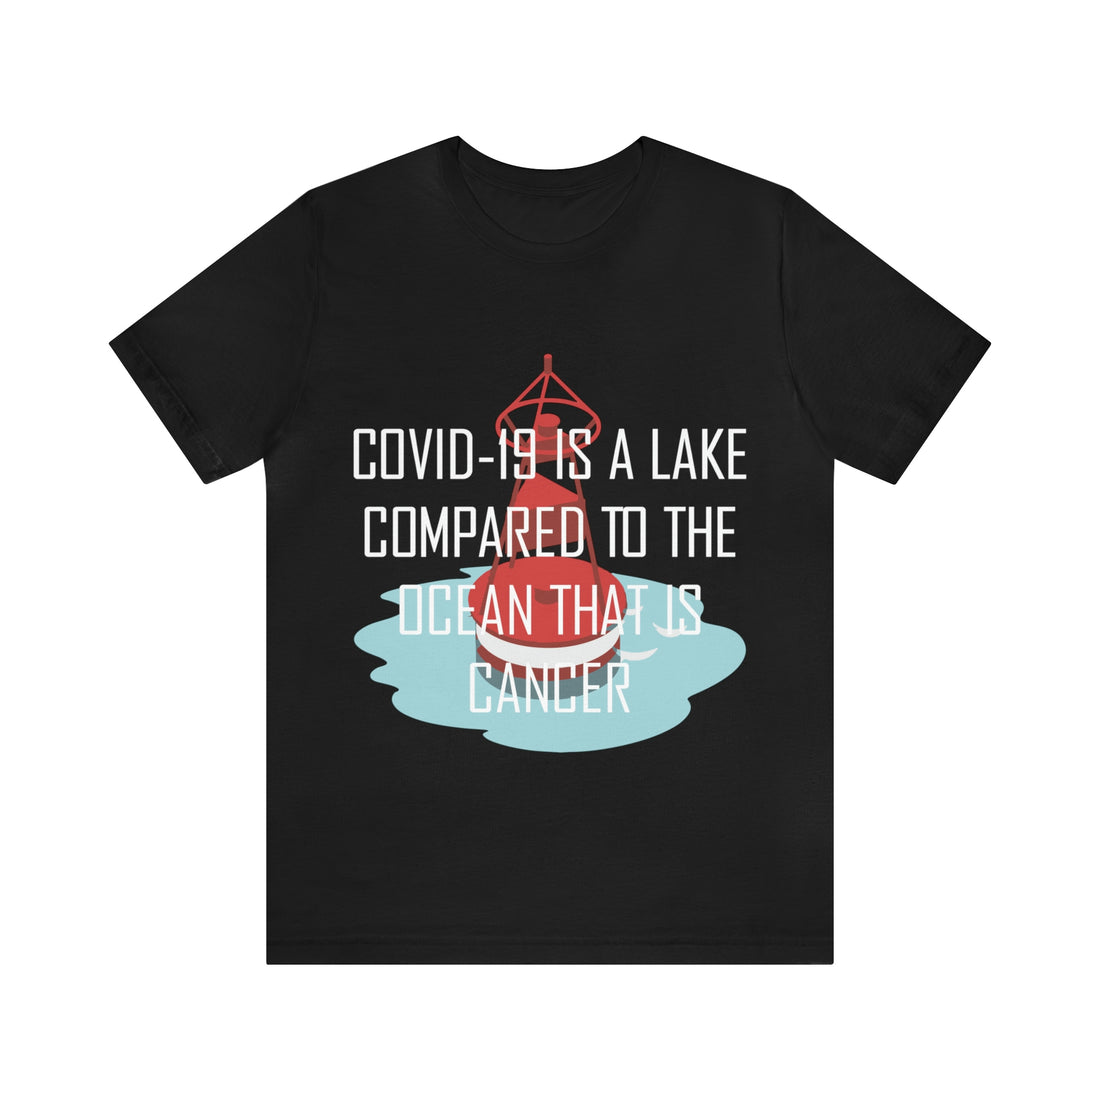 Covid-19 Is A Lake Compared To The Ocean That Is Cancer - Unisex Jersey Short Sleeve Tee